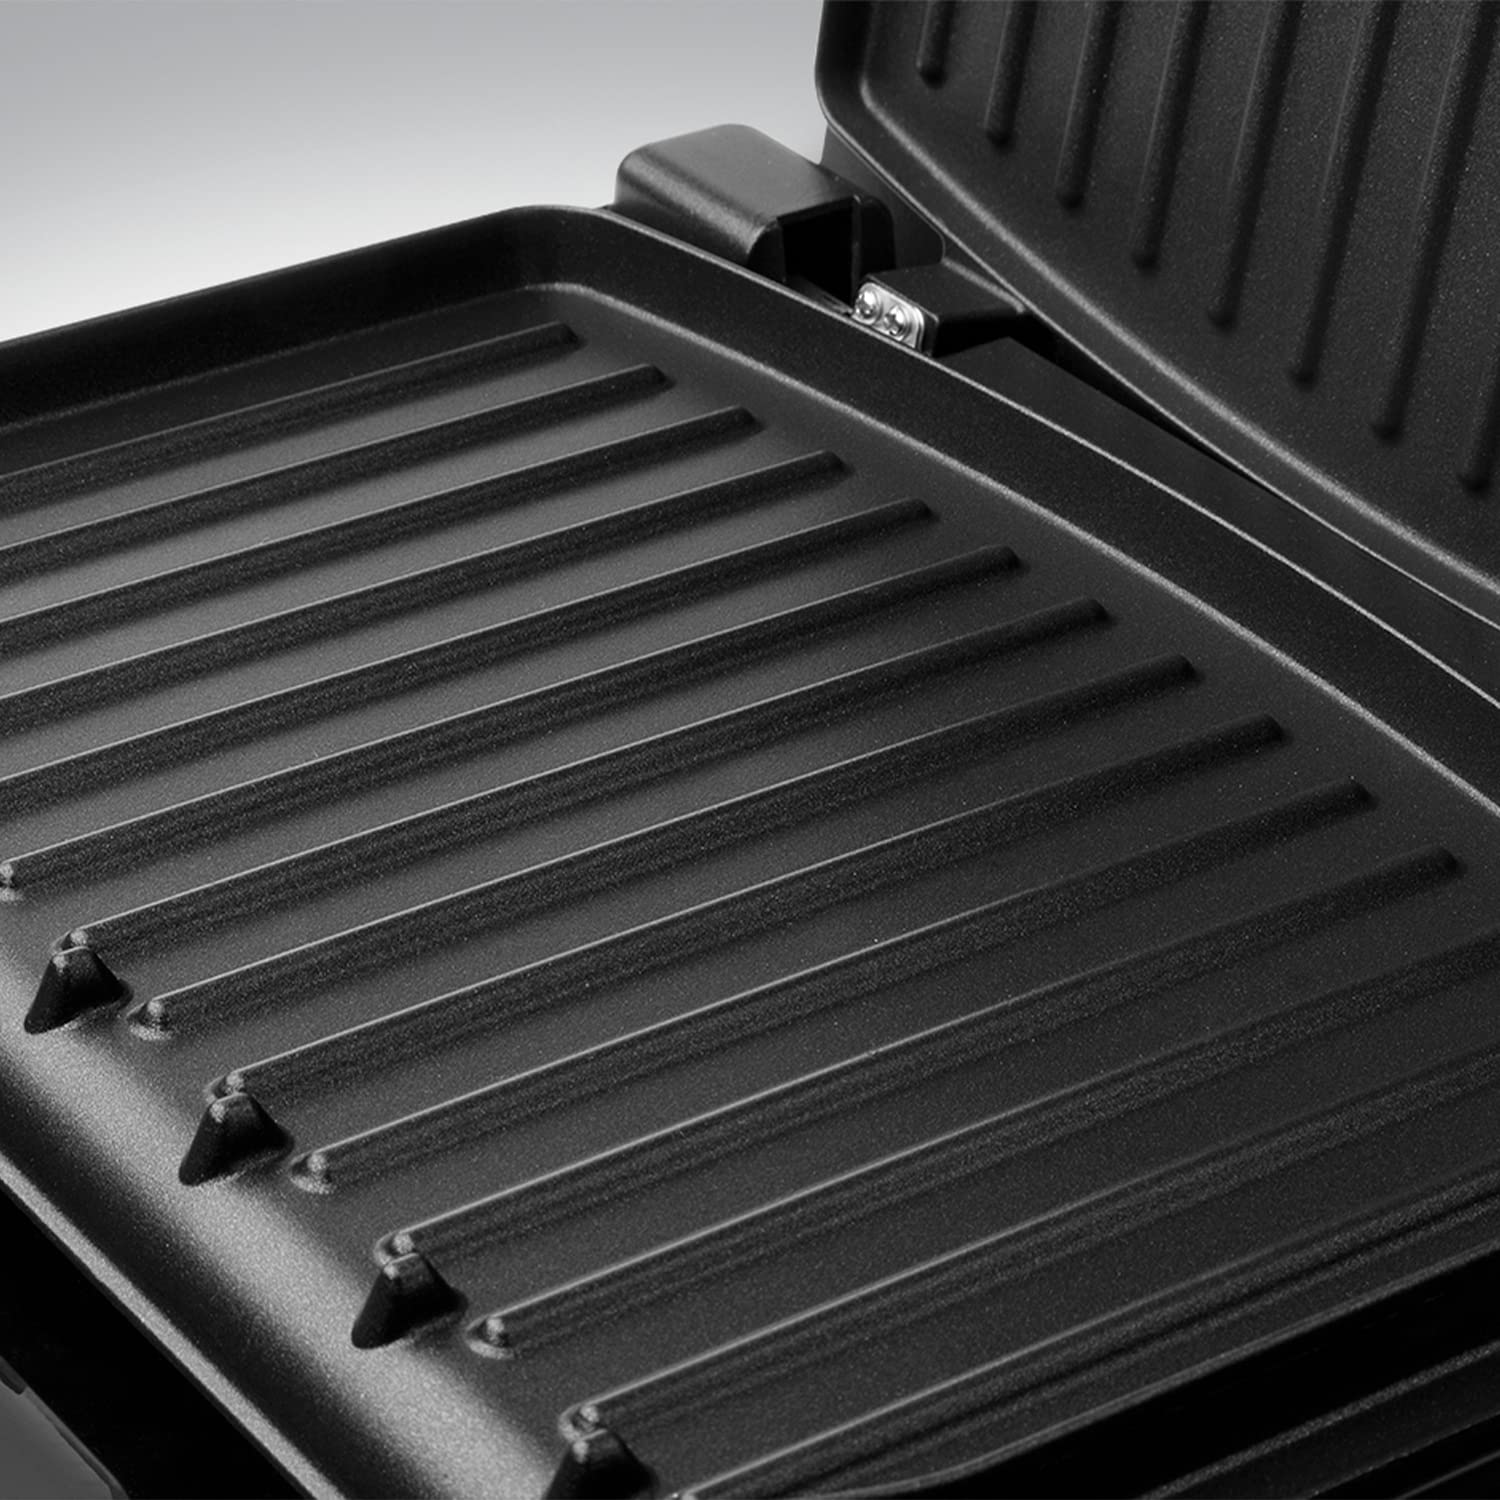 George Foreman Electric Indoor Grill Medium, For Home & Office Use, Stainless Steel Family Grill, 1650W, 1 Year Warranty – 25040